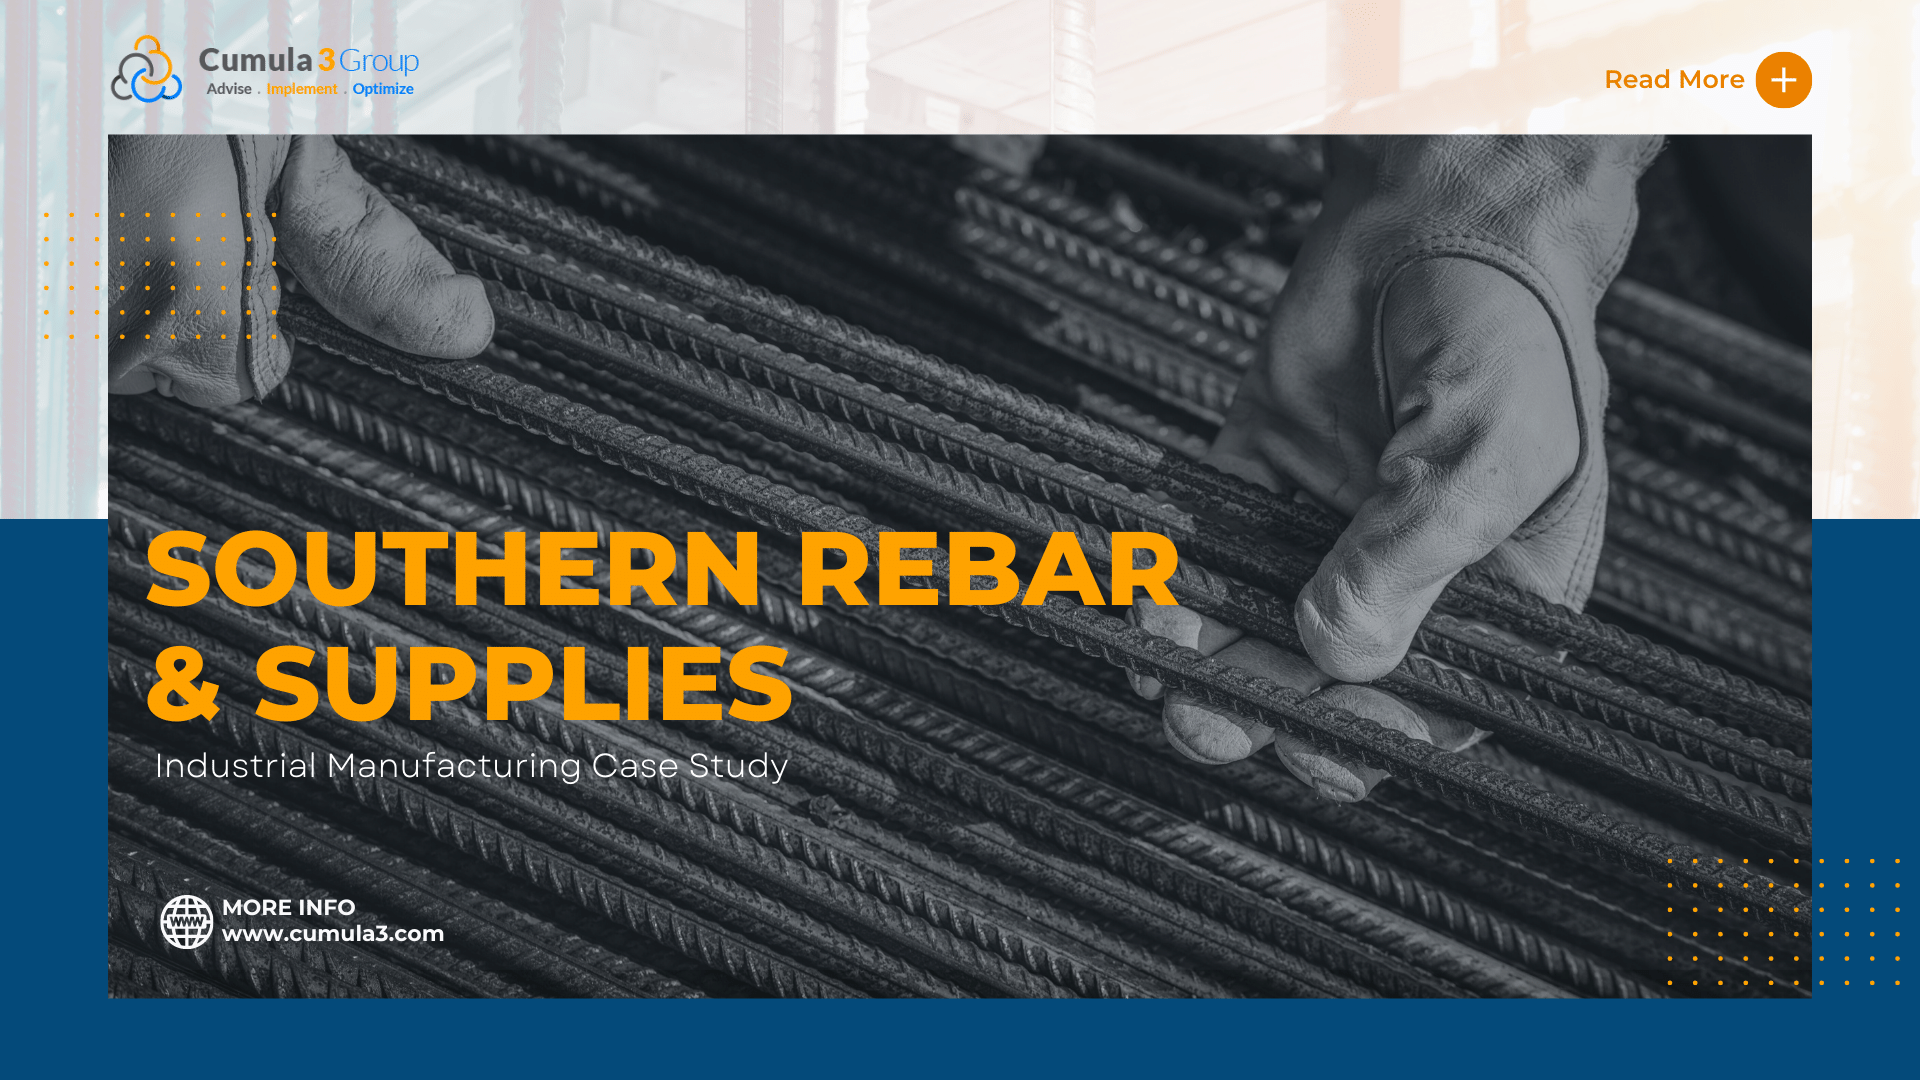 Industrial Manufacturing Case Study: Southern Rebar & Supplies